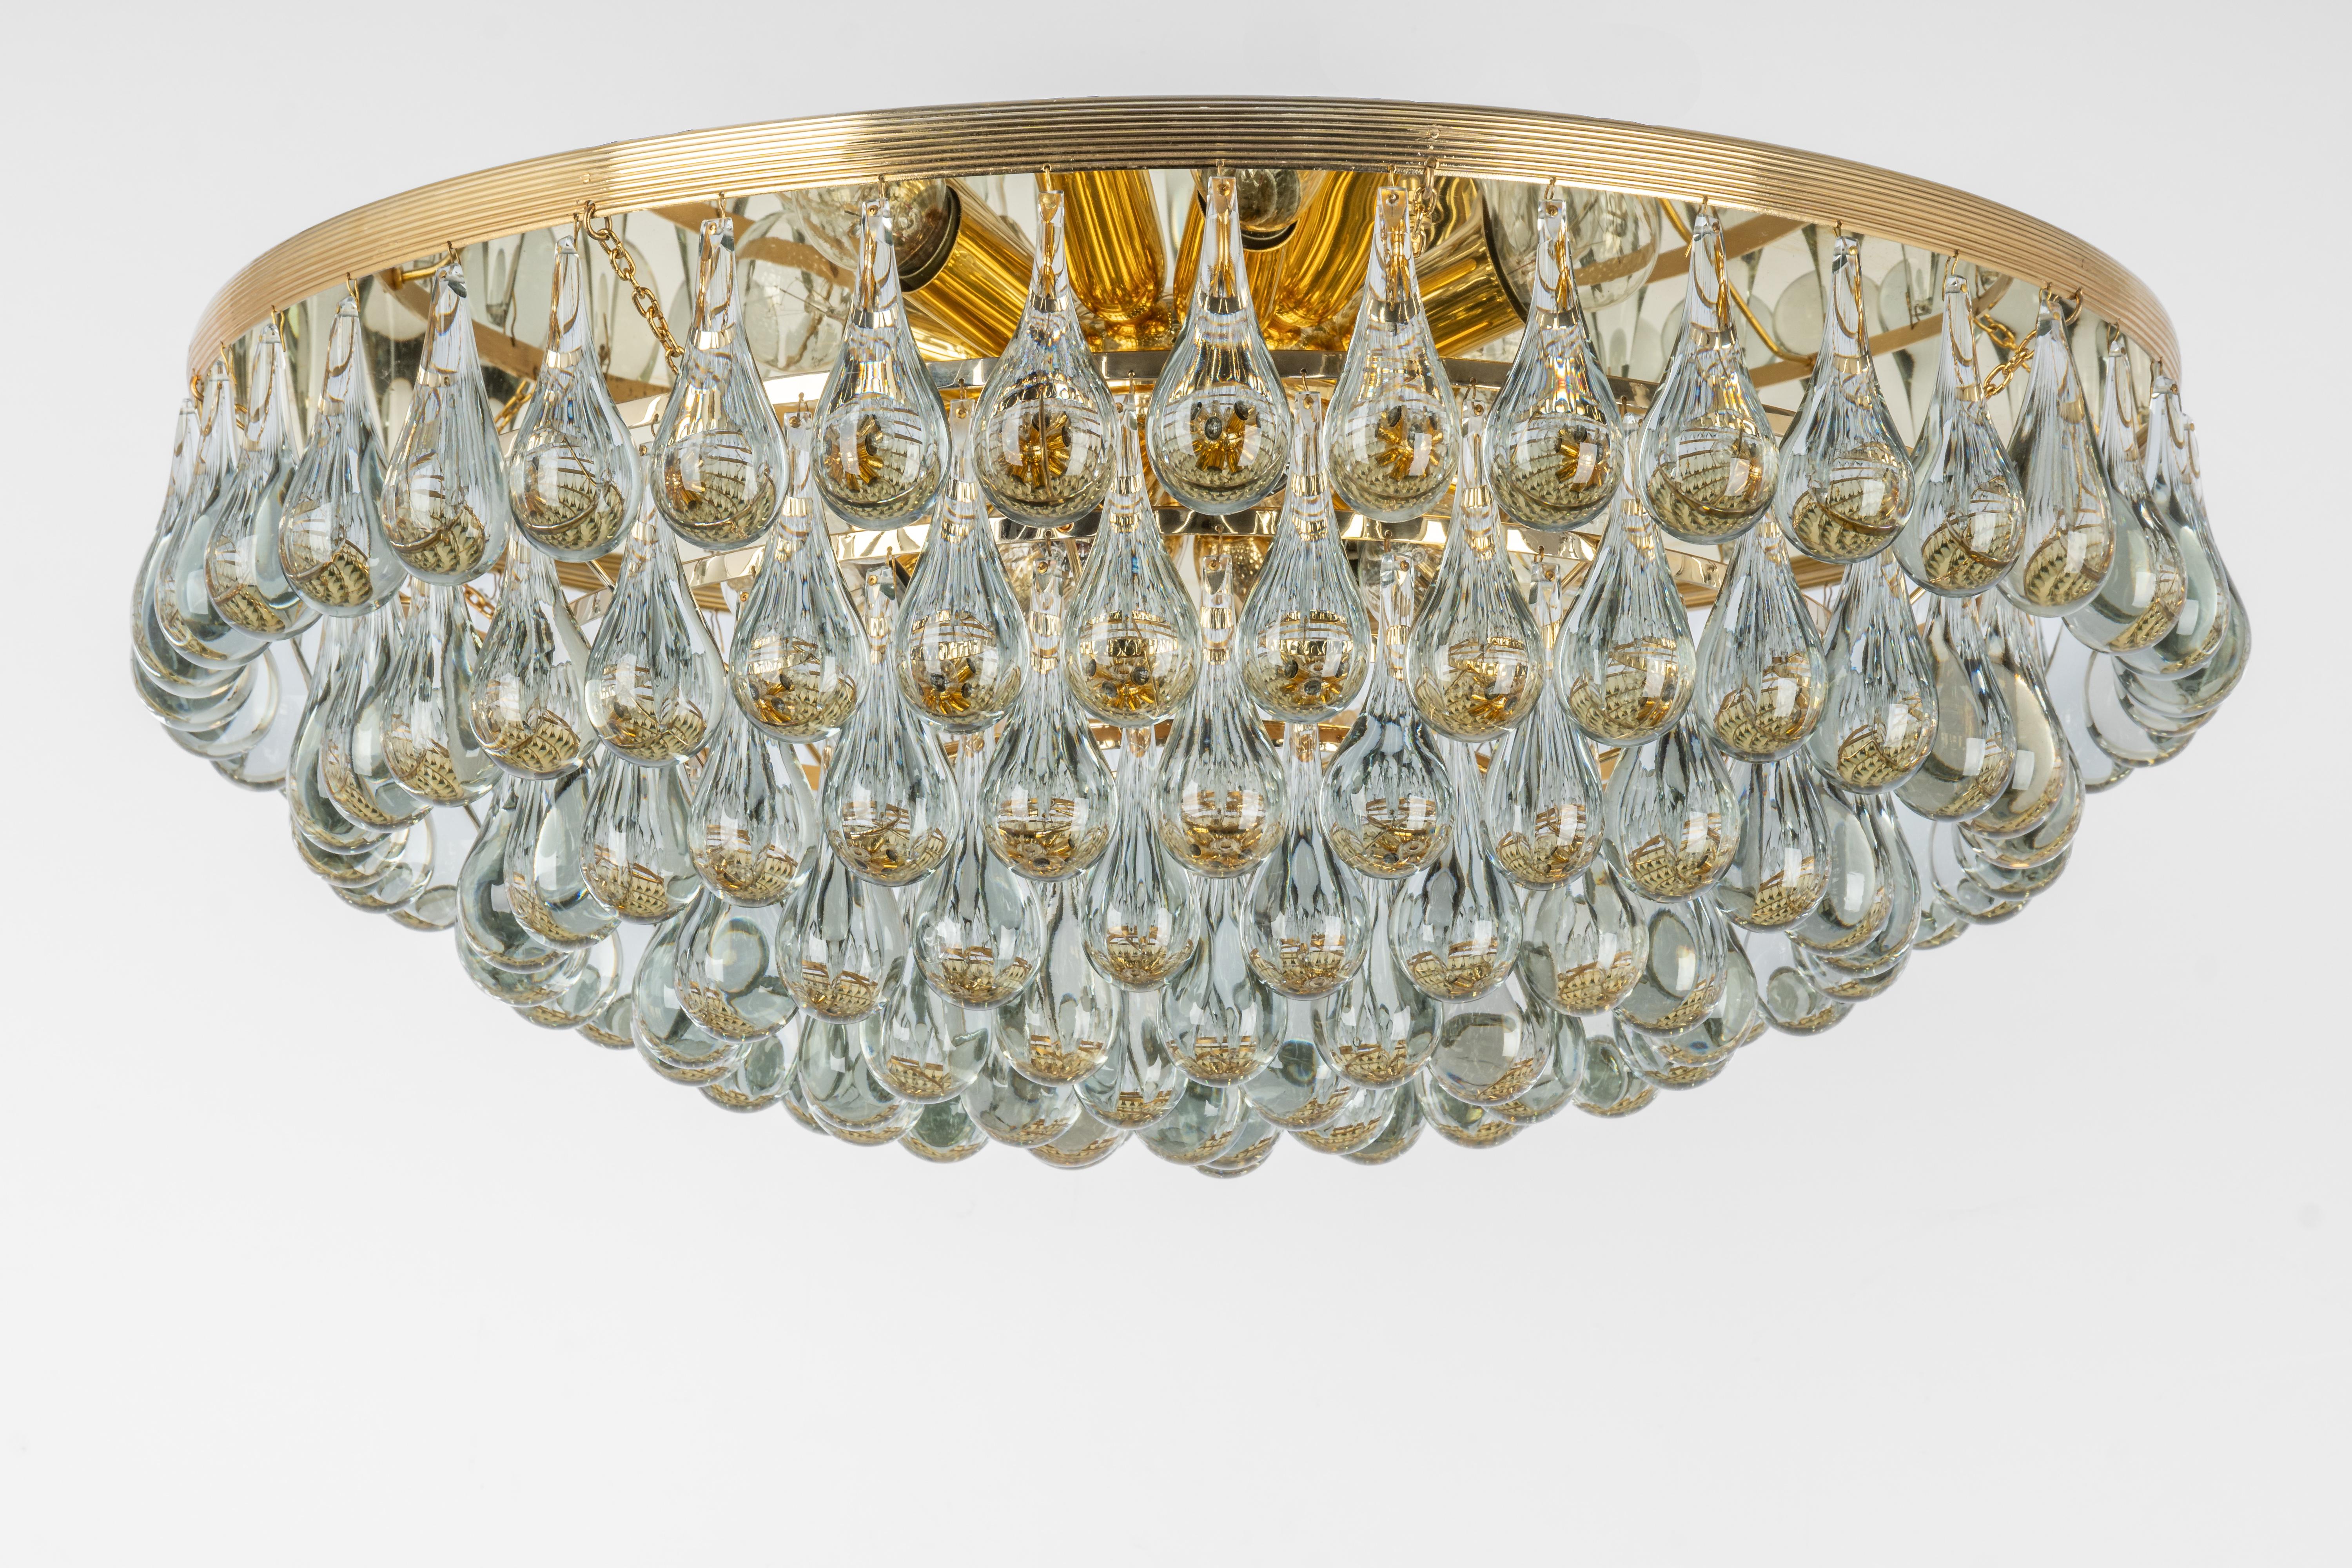 1 of 3 Large Murano Glass Tear Drop Chandelier by C.Palme, Germany, 1970s For Sale 5